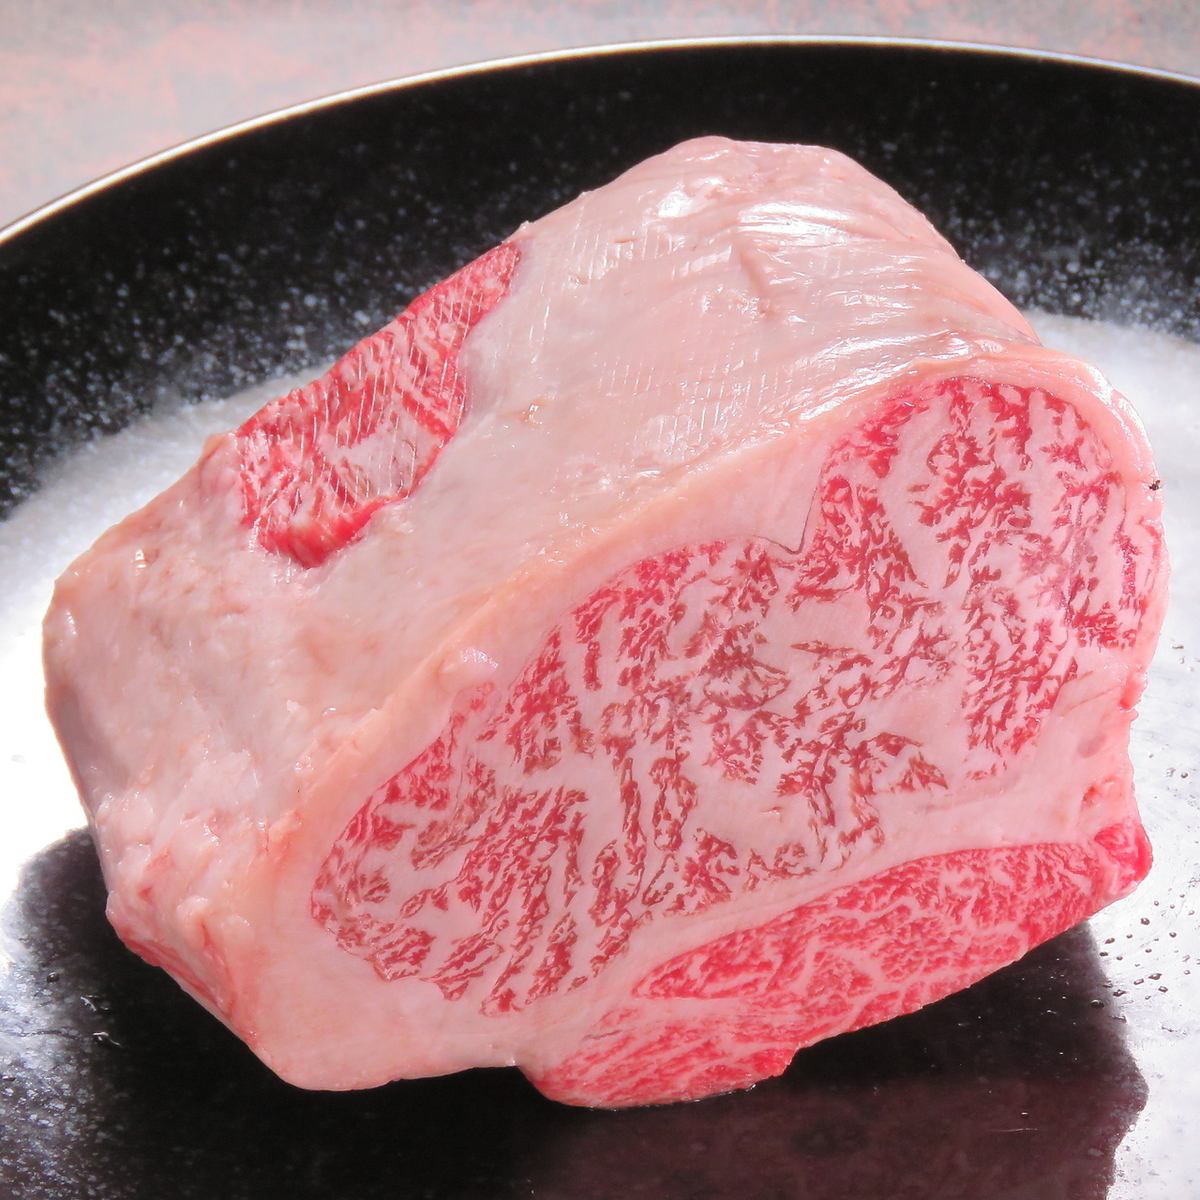 You can enjoy high quality meat such as Japanese black beef from Hokkaido.